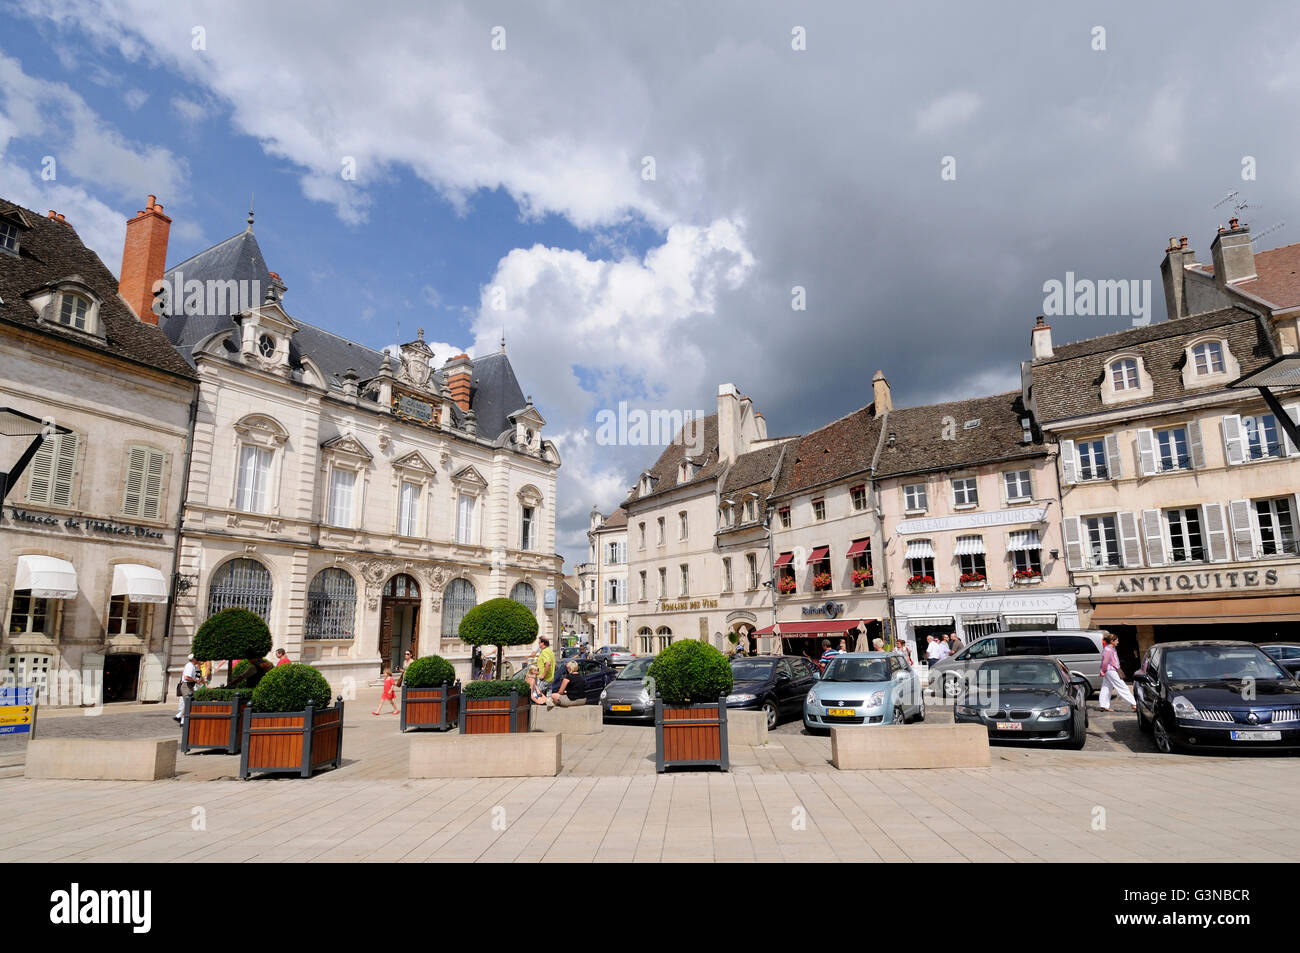 Square, Beaune, Burgundy, Cote d'Or, France, Europe Stock Photo